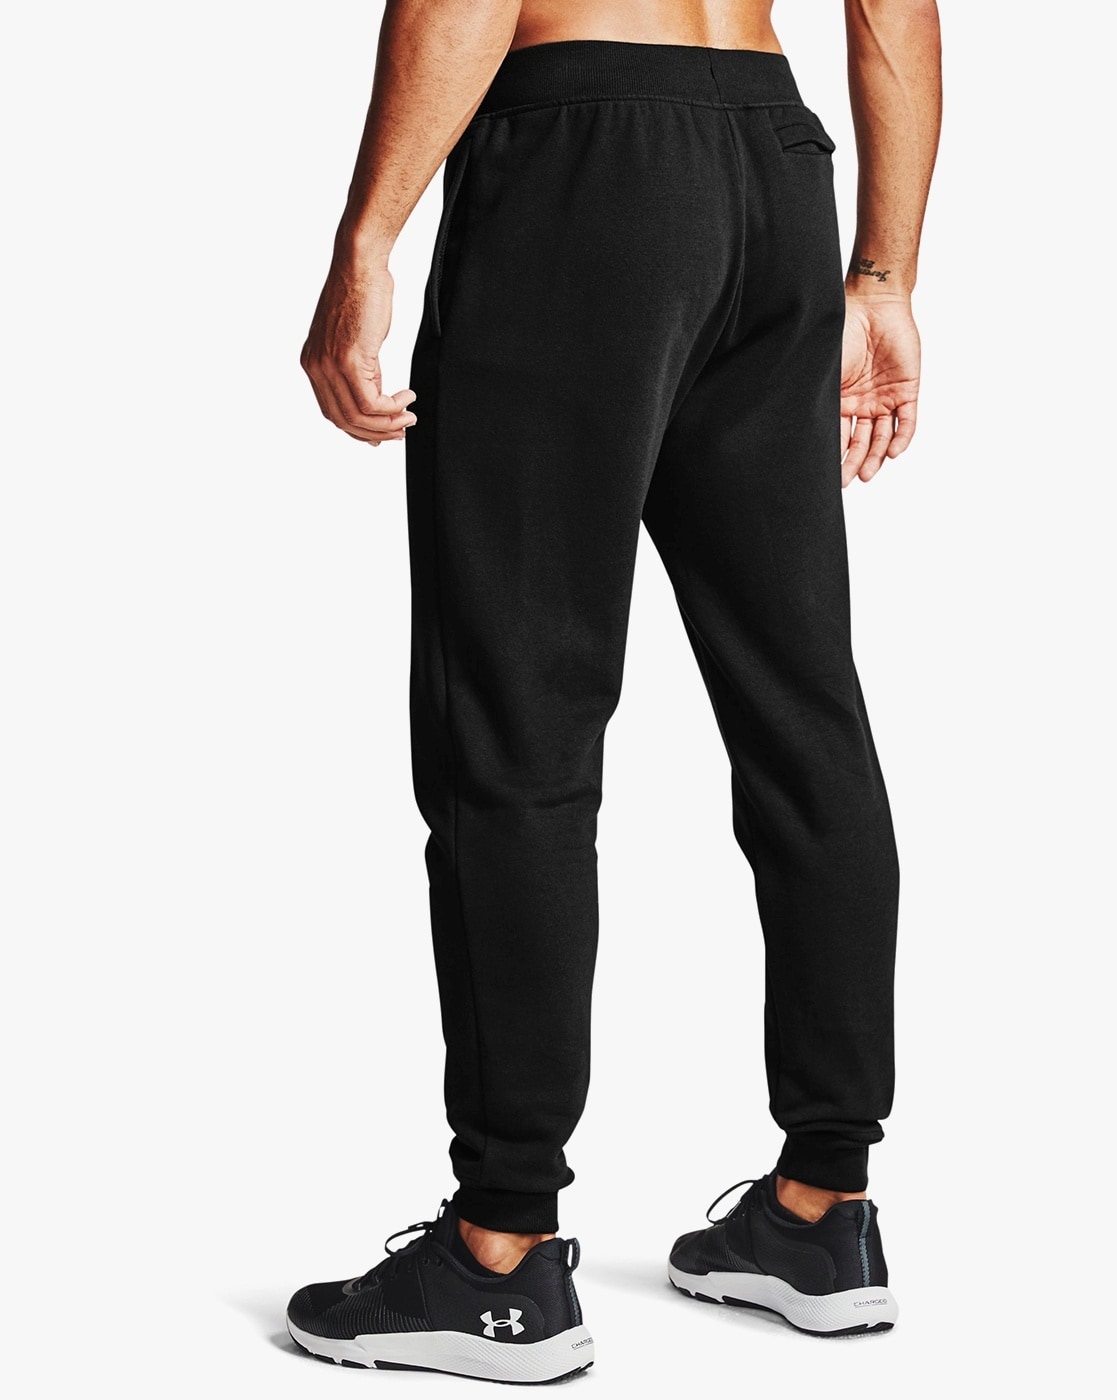 Under Armour Men's Unstoppable/move Jogger Pants, Grey